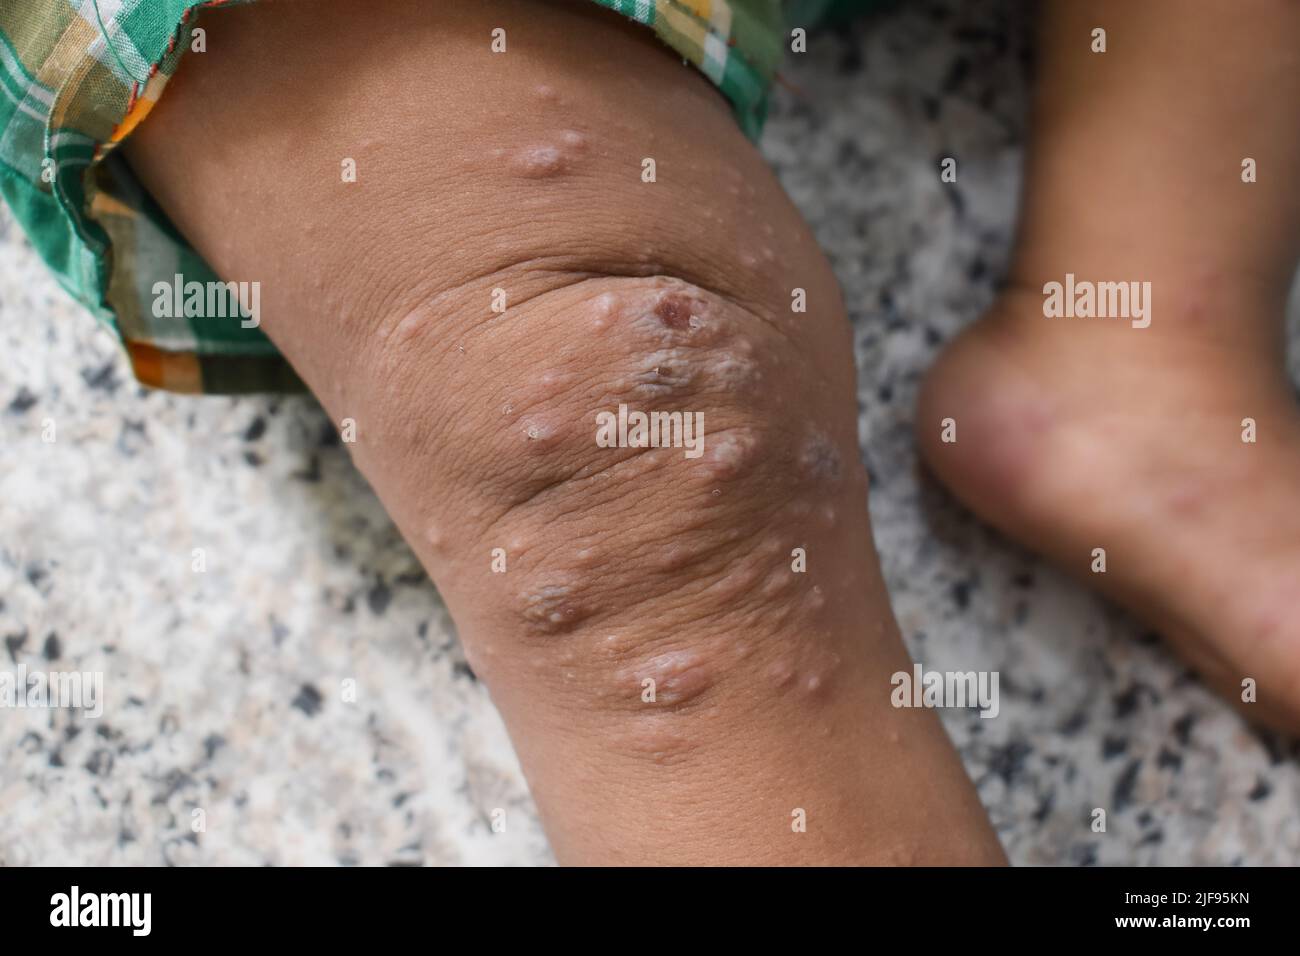 Scabies Infestation with secondary or superimposed bacterial infection and pustules in leg of Southeast Asian, Burmese child. Stock Photo